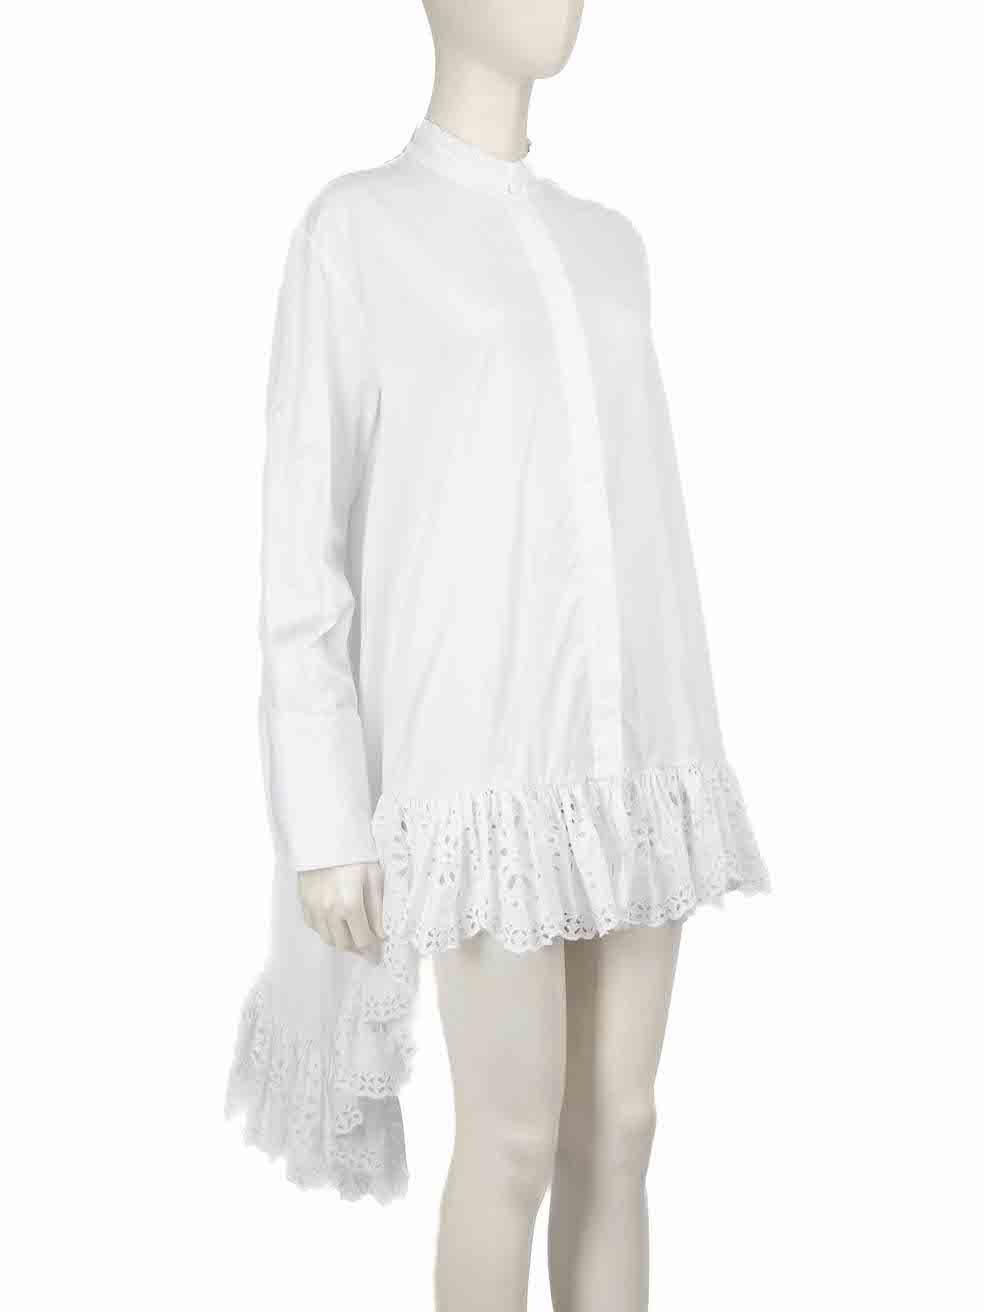 CONDITION is Very good. Hardly any visible wear to dress is evident on this used Alexander McQueen designer resale item.
 
 
 
 Details
 
 
 White
 
 Cotton
 
 Shirt dress
 
 Mini
 
 Lace trimmed
 
 High low hem
 
 Long sleeves
 
 Buttoned cuffs
 
